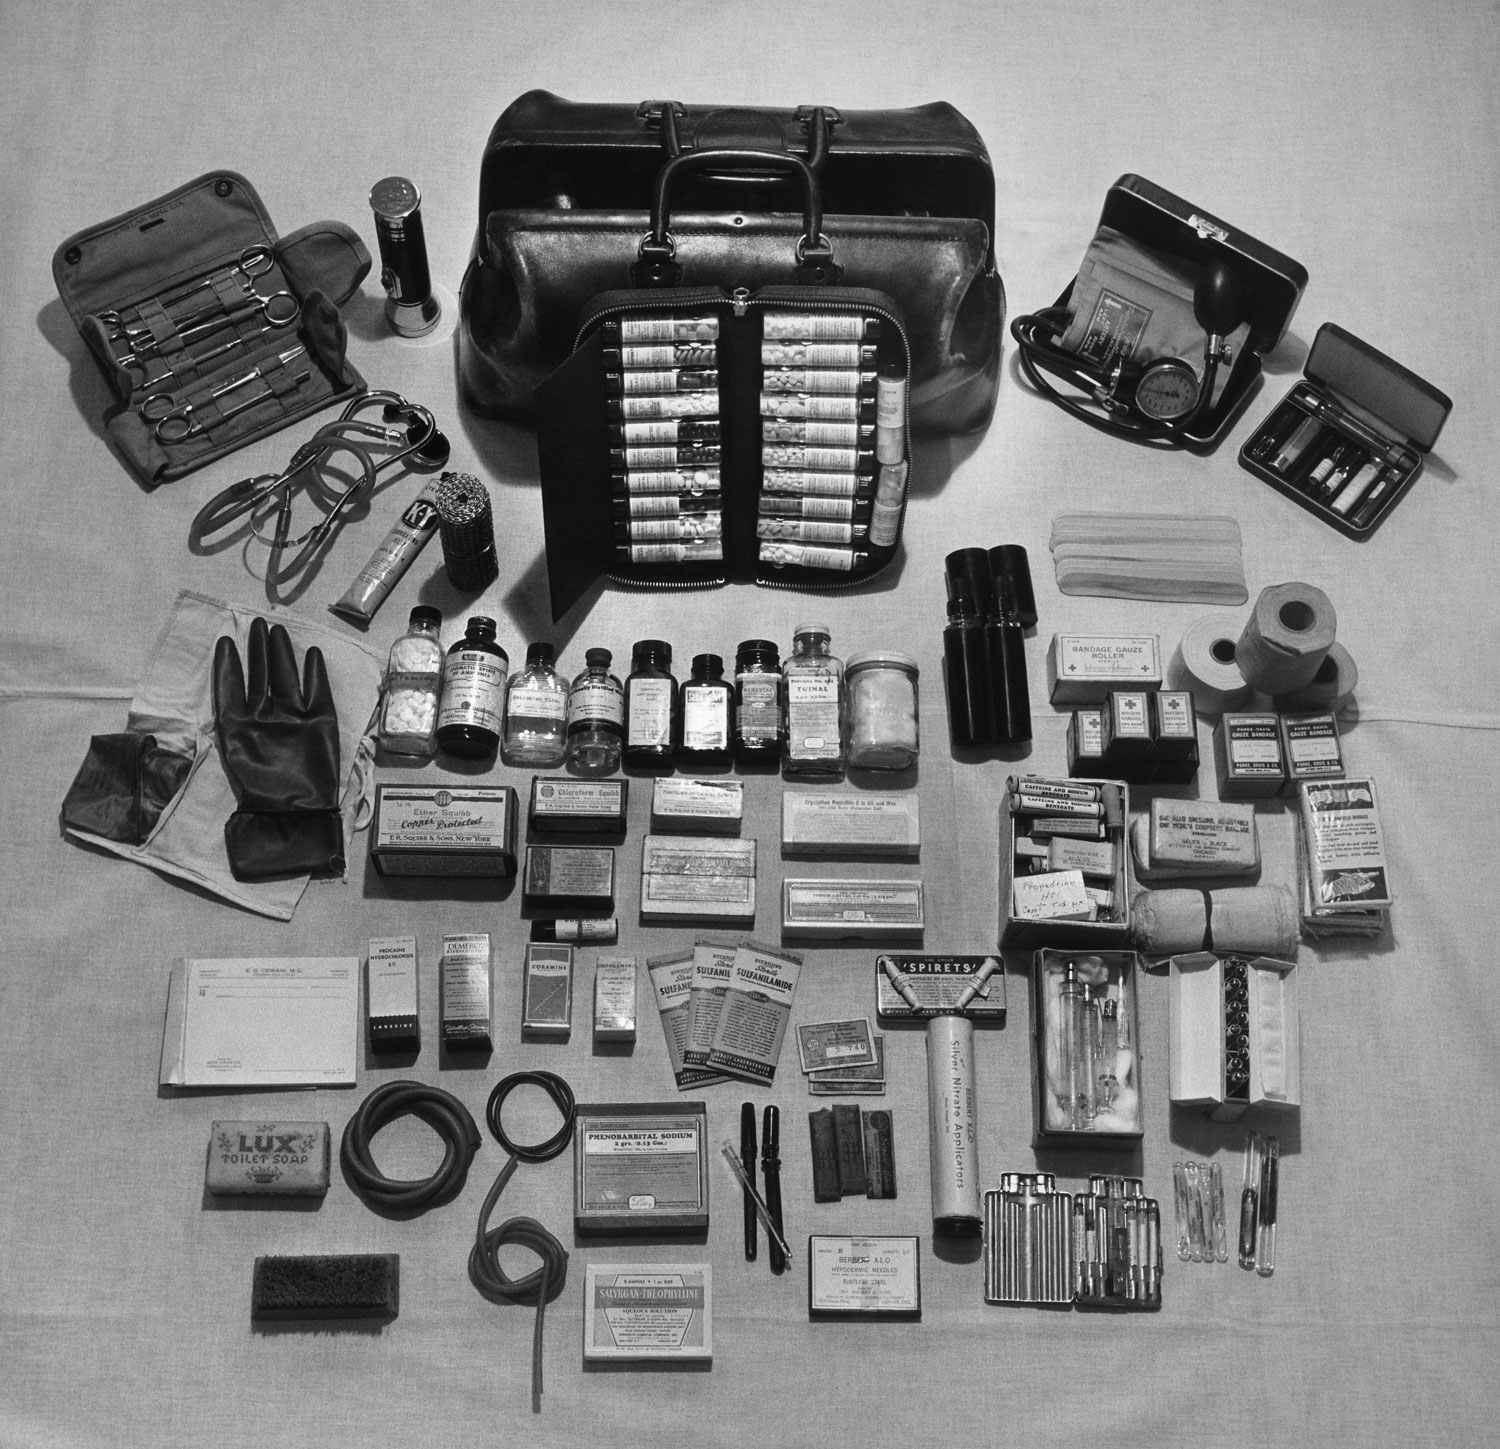 Not published in LIFE. The contents of a country doctor's bag, Kremmling, Colo., 1948.